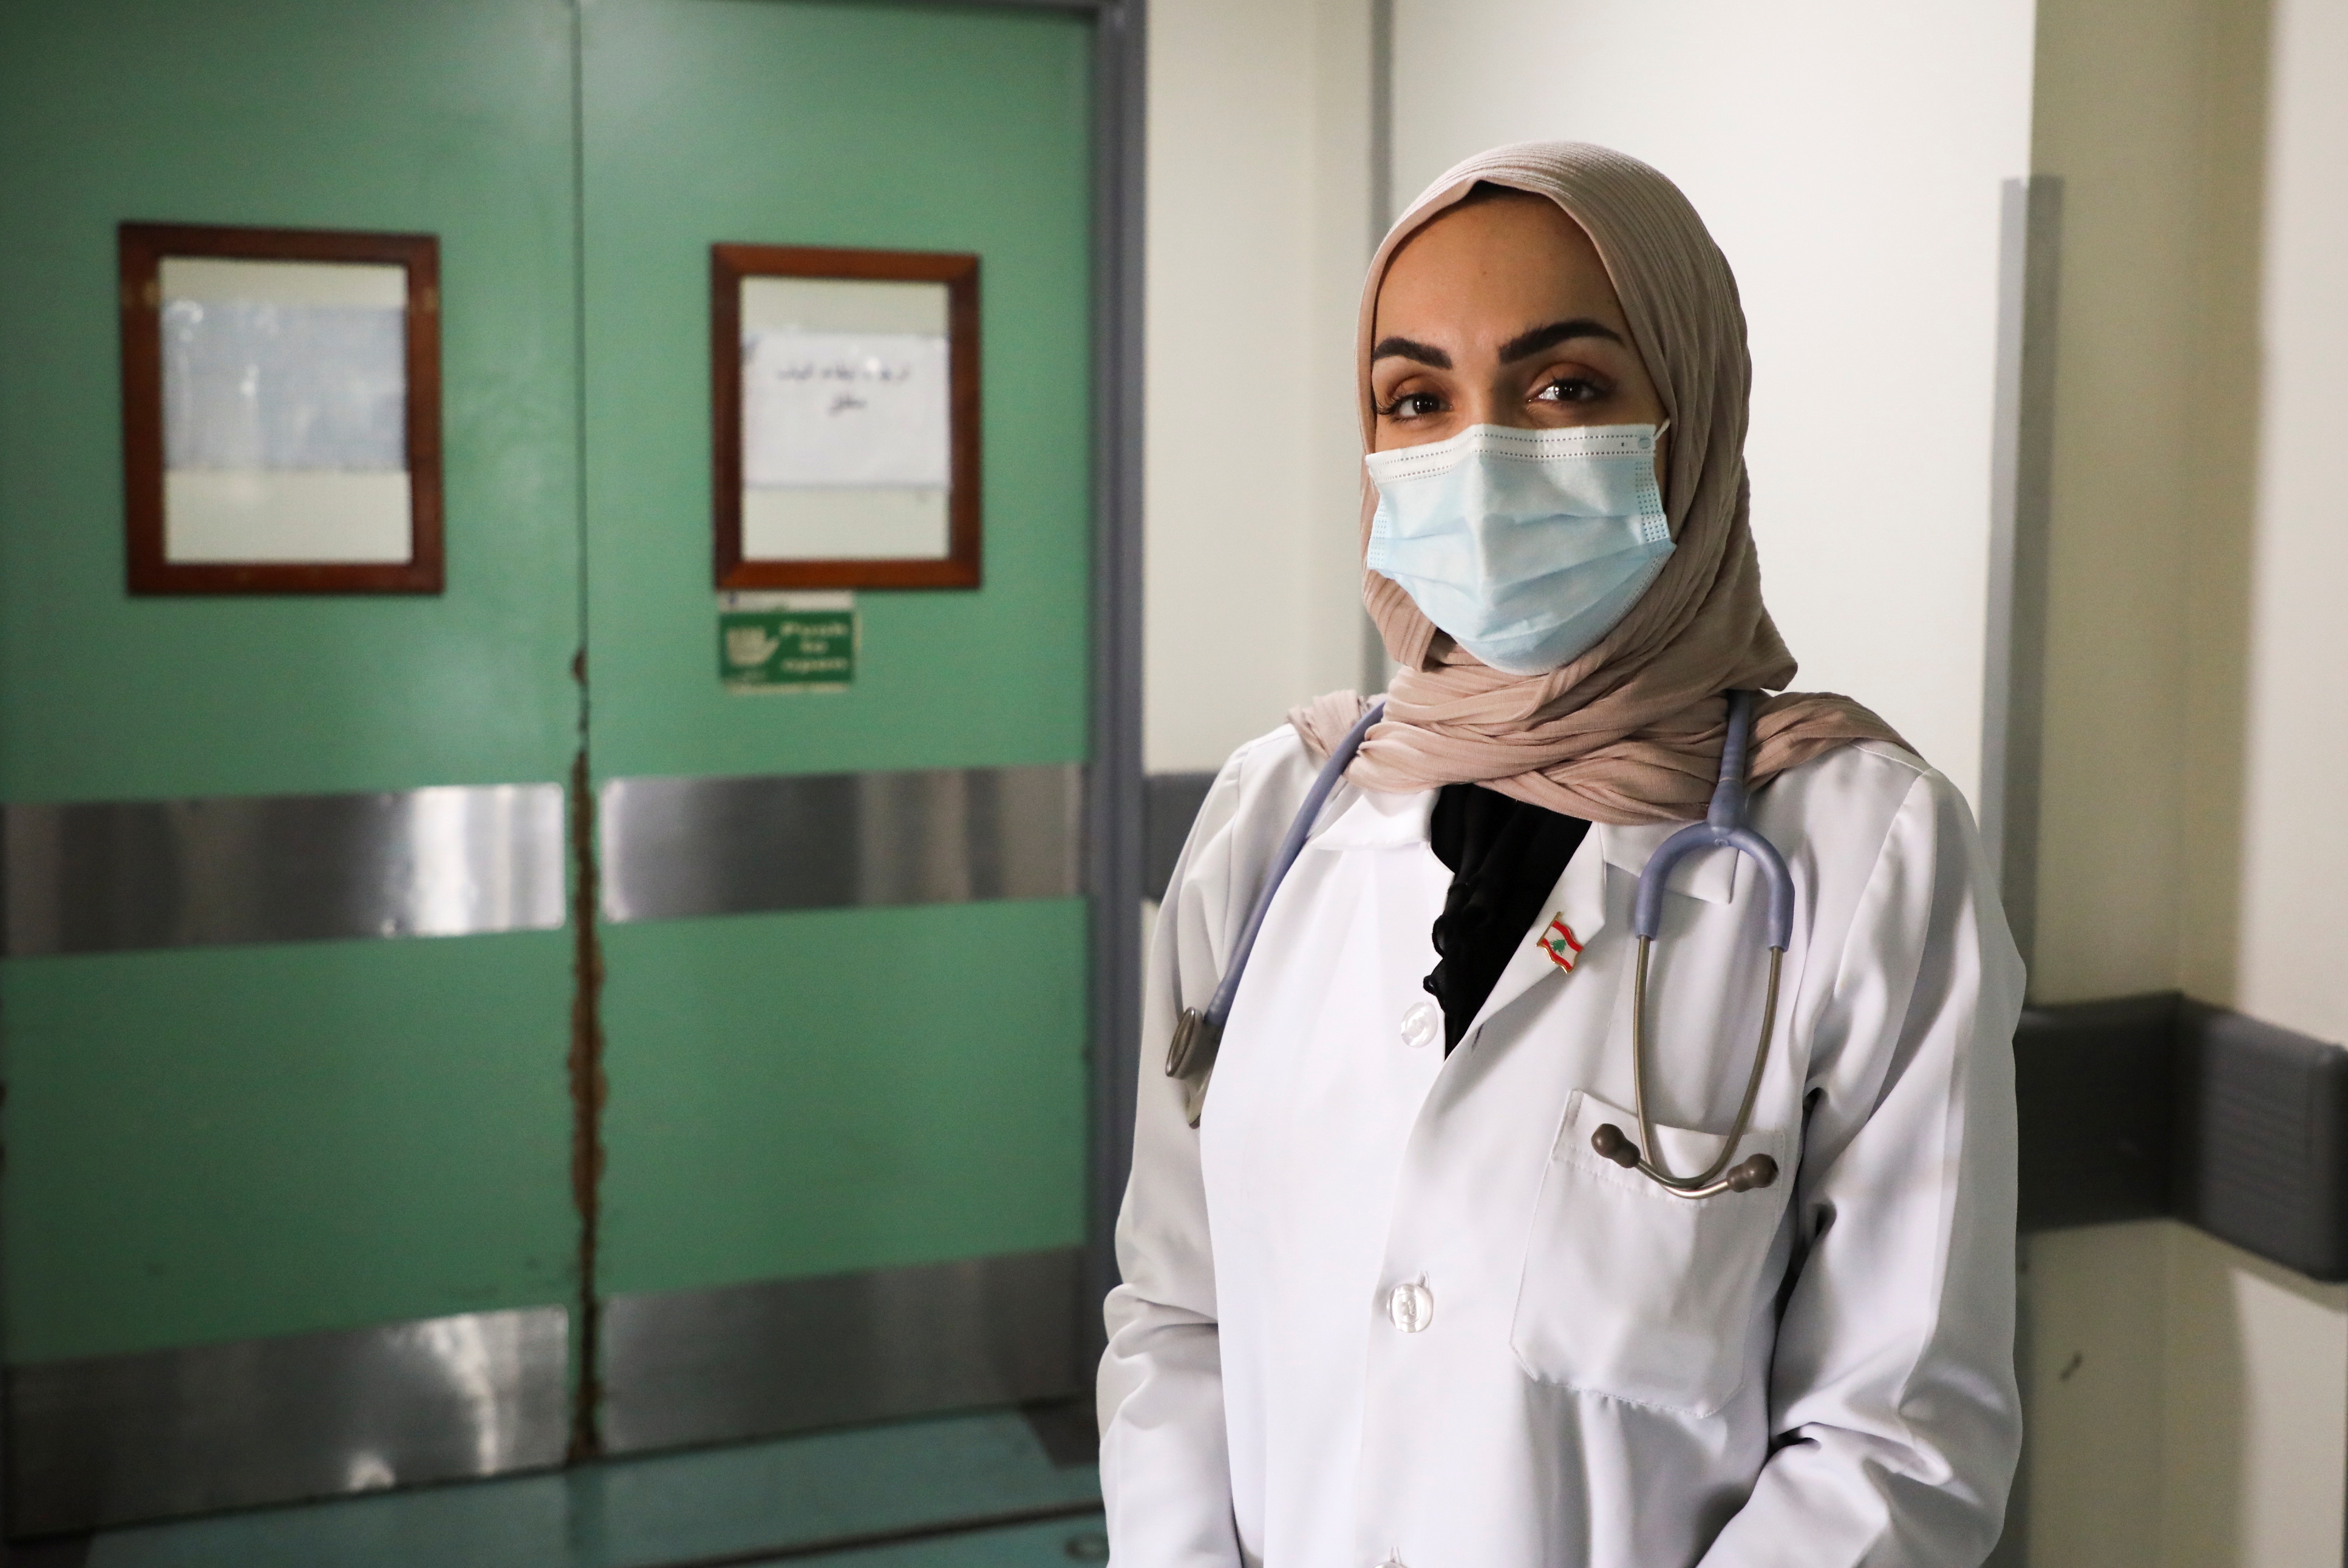 Israa Seblani, a Lebanese doctor and the bride who was caught up in the last year's Beirut port blast during a wedding photoshoot, poses at Rafik Hariri University Hospital, in Beirut